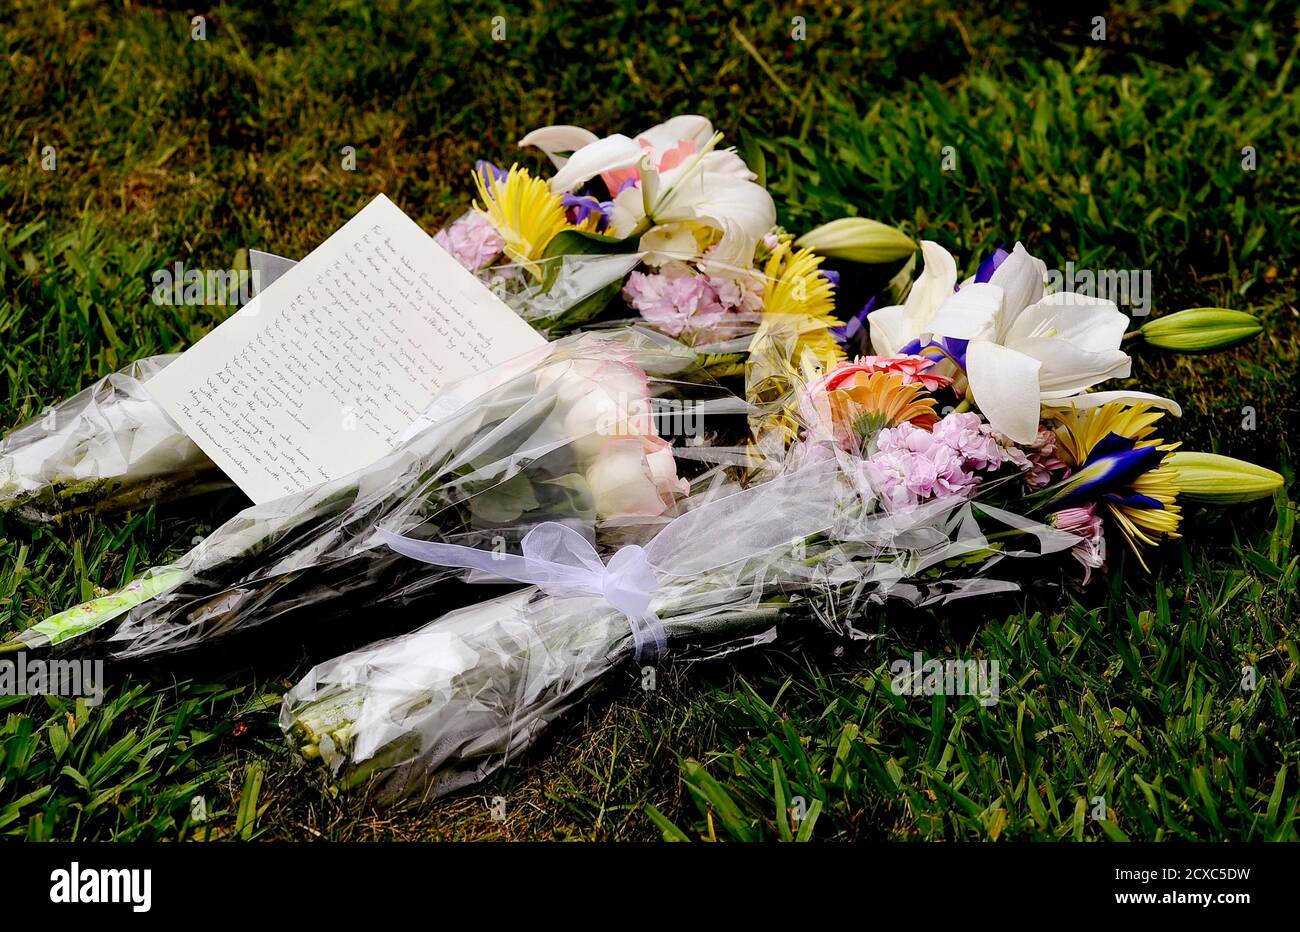 Bunches of flowers are placed on the lawn outside the Alpha Phi sorority house in a makeshift memorial after a series of drive-by shootings that left 6 people dead in the Isla Vista section of Santa Barbara, California May 24, 2014. A lone gunman sprayed bullets from a car in a drive-by shooting in a southern California college town, killing at least six people before his car crashed and he was found dead inside, authorities said on Saturday. Two of the fatalities and one of the wounded were shot outside the Alpha Phi house. Police have identified Elliot Rodger as the suspect in the shootings. Foto Stock